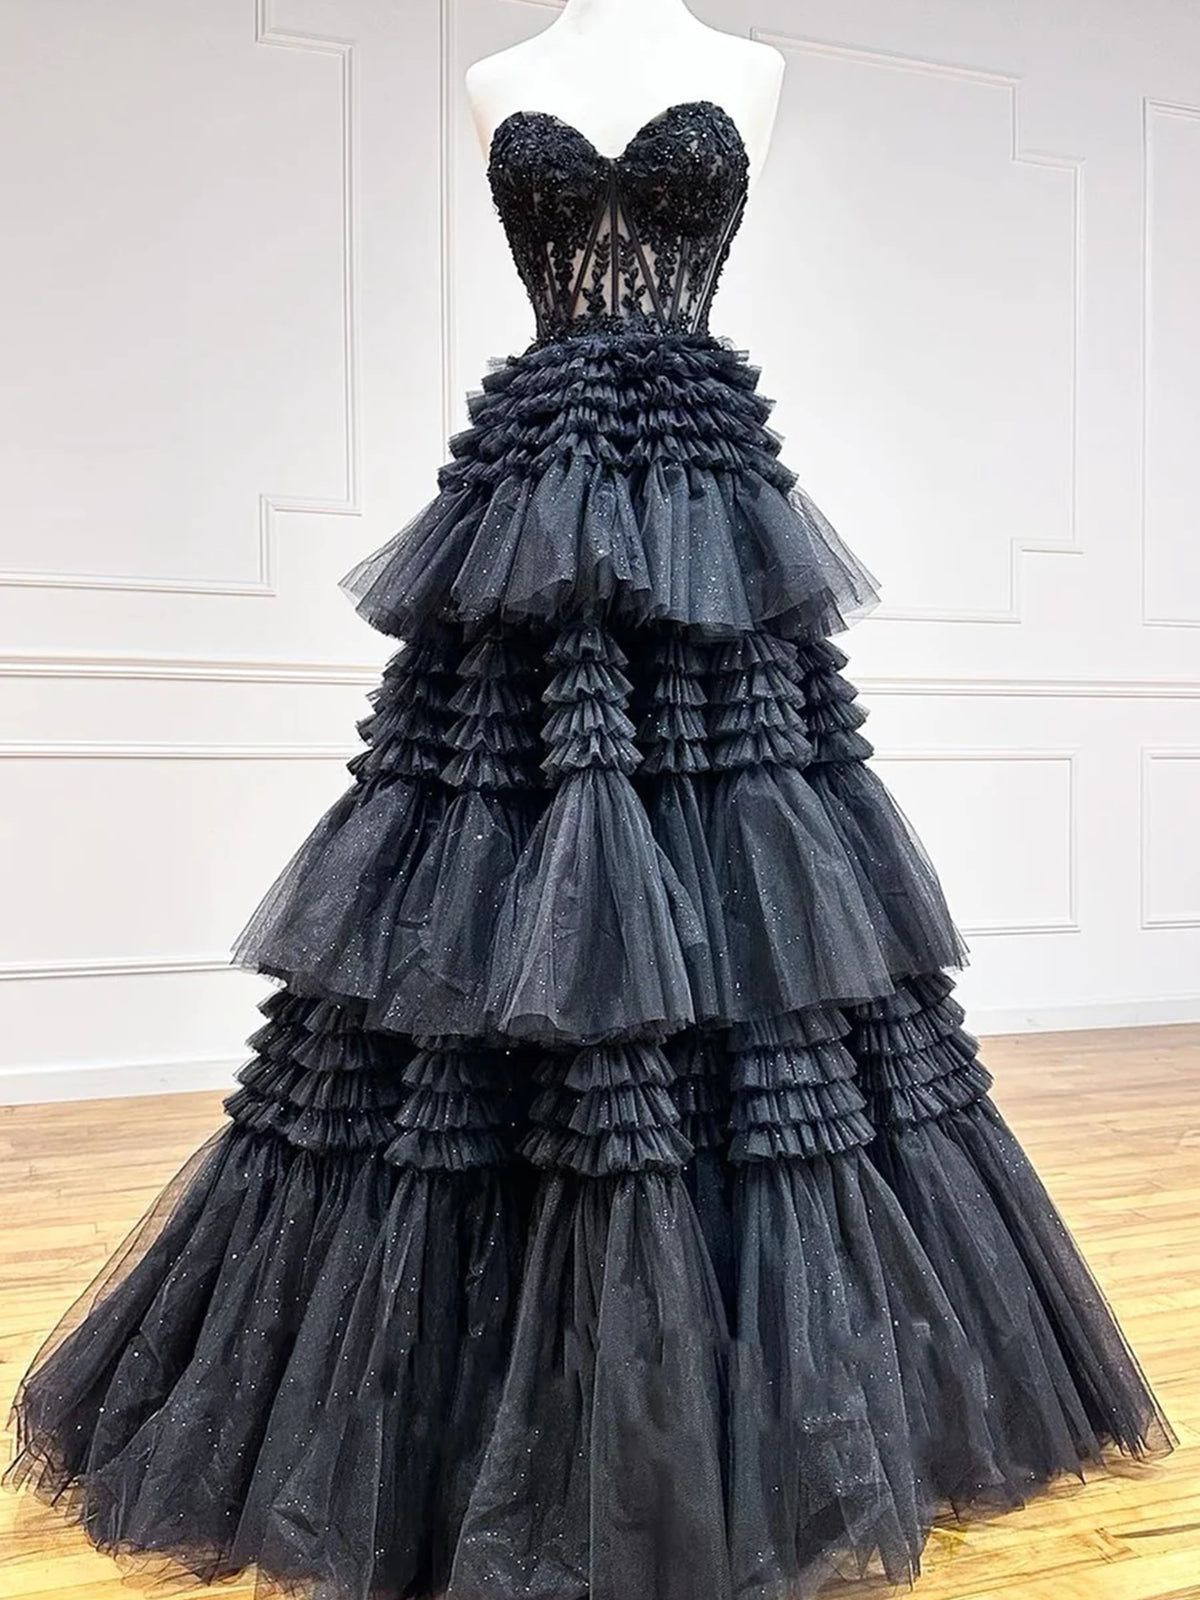 Gothic Wedding Dresses: 30 Non-Traditional Looks + FAQs